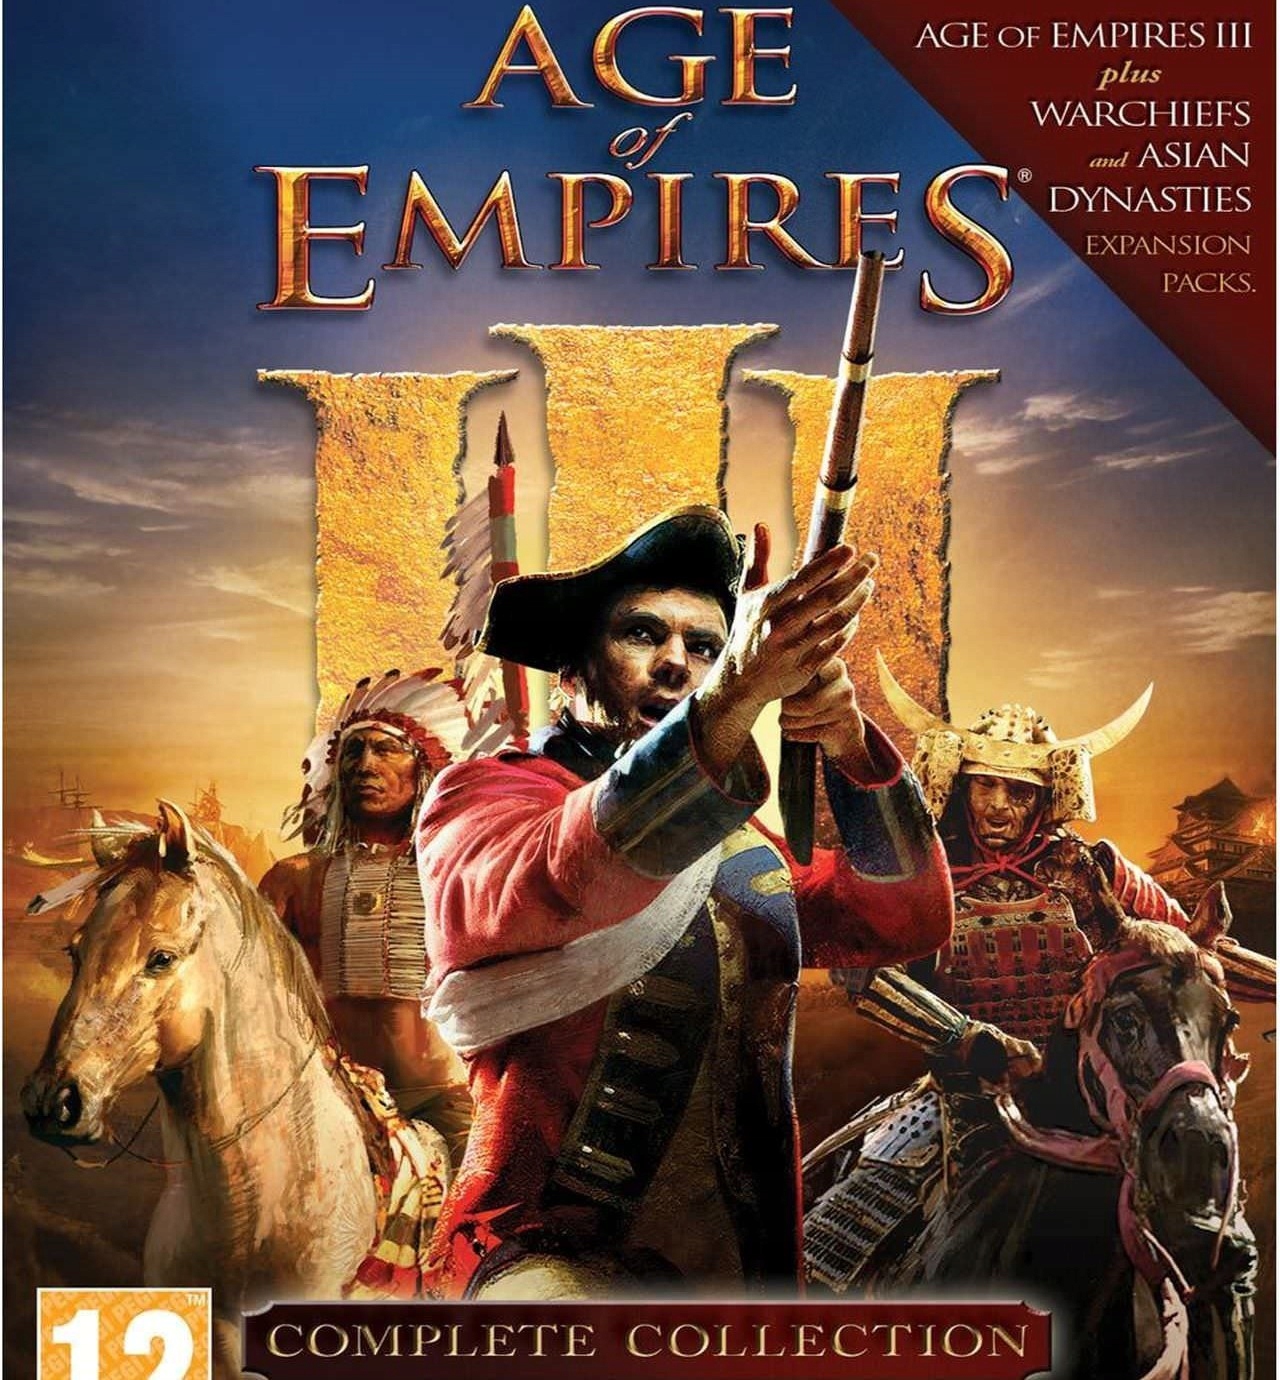 Age of empires 3 in steam фото 79